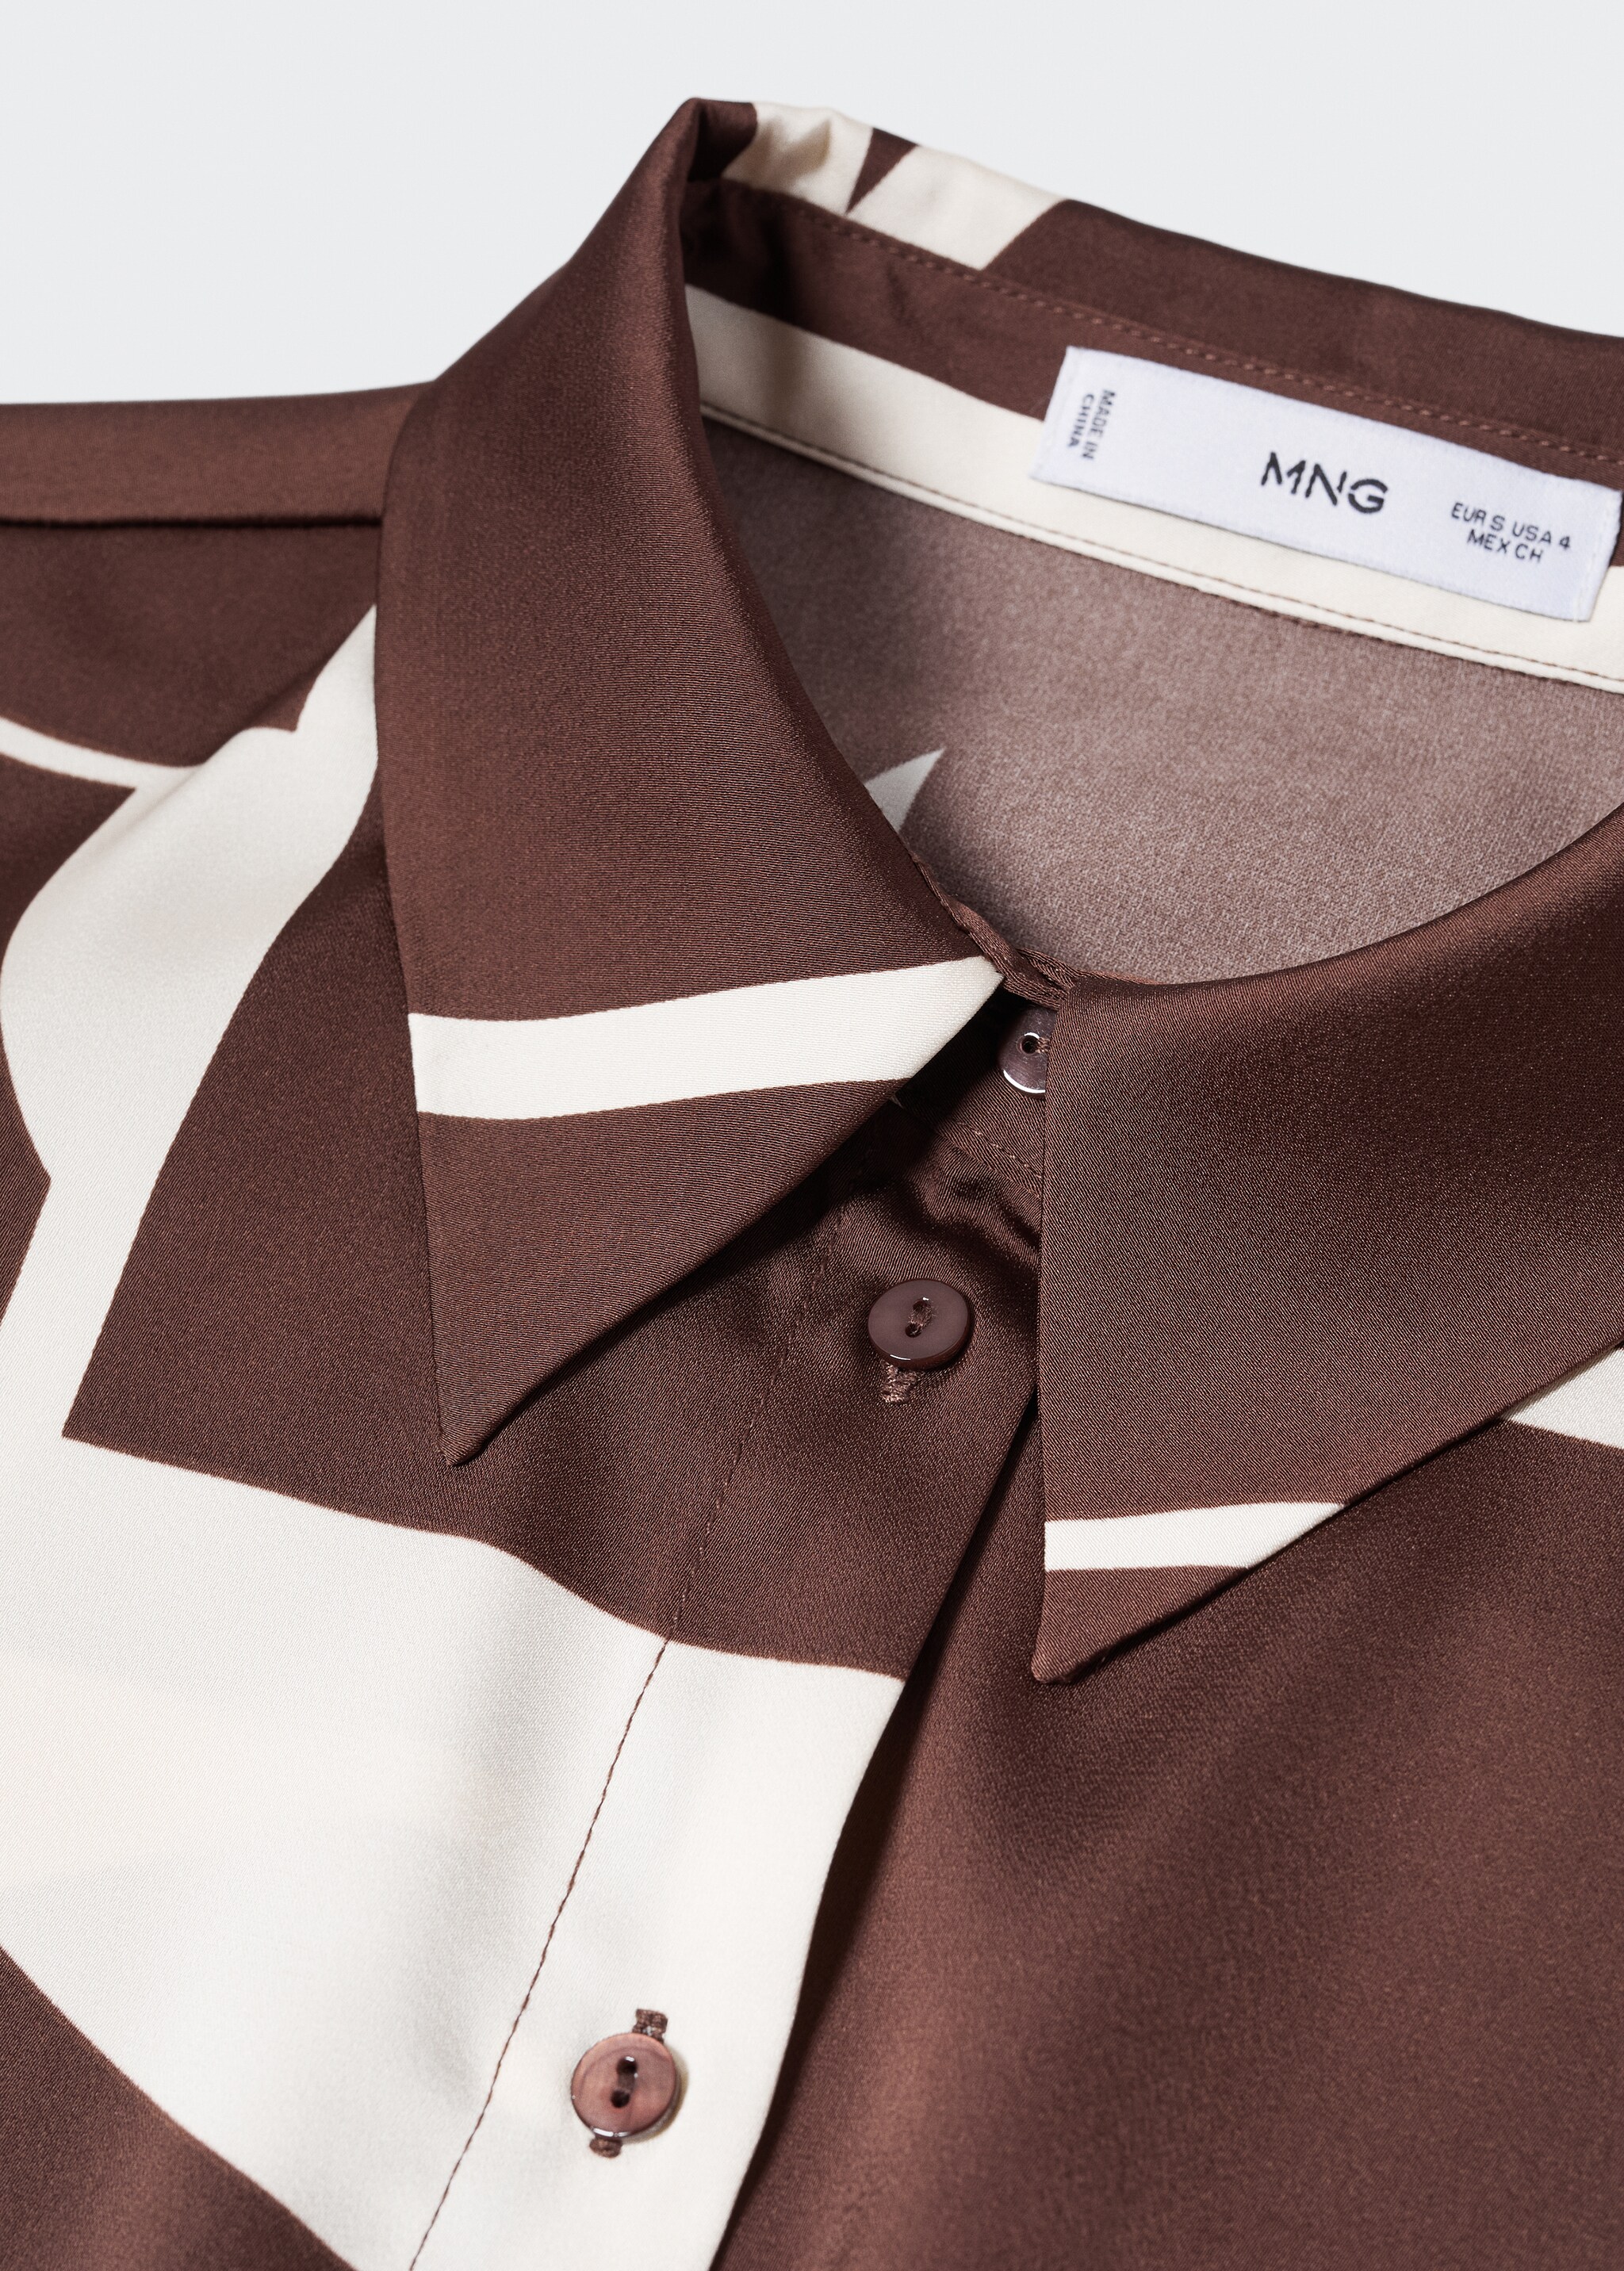 Satin print shirt - Details of the article 8